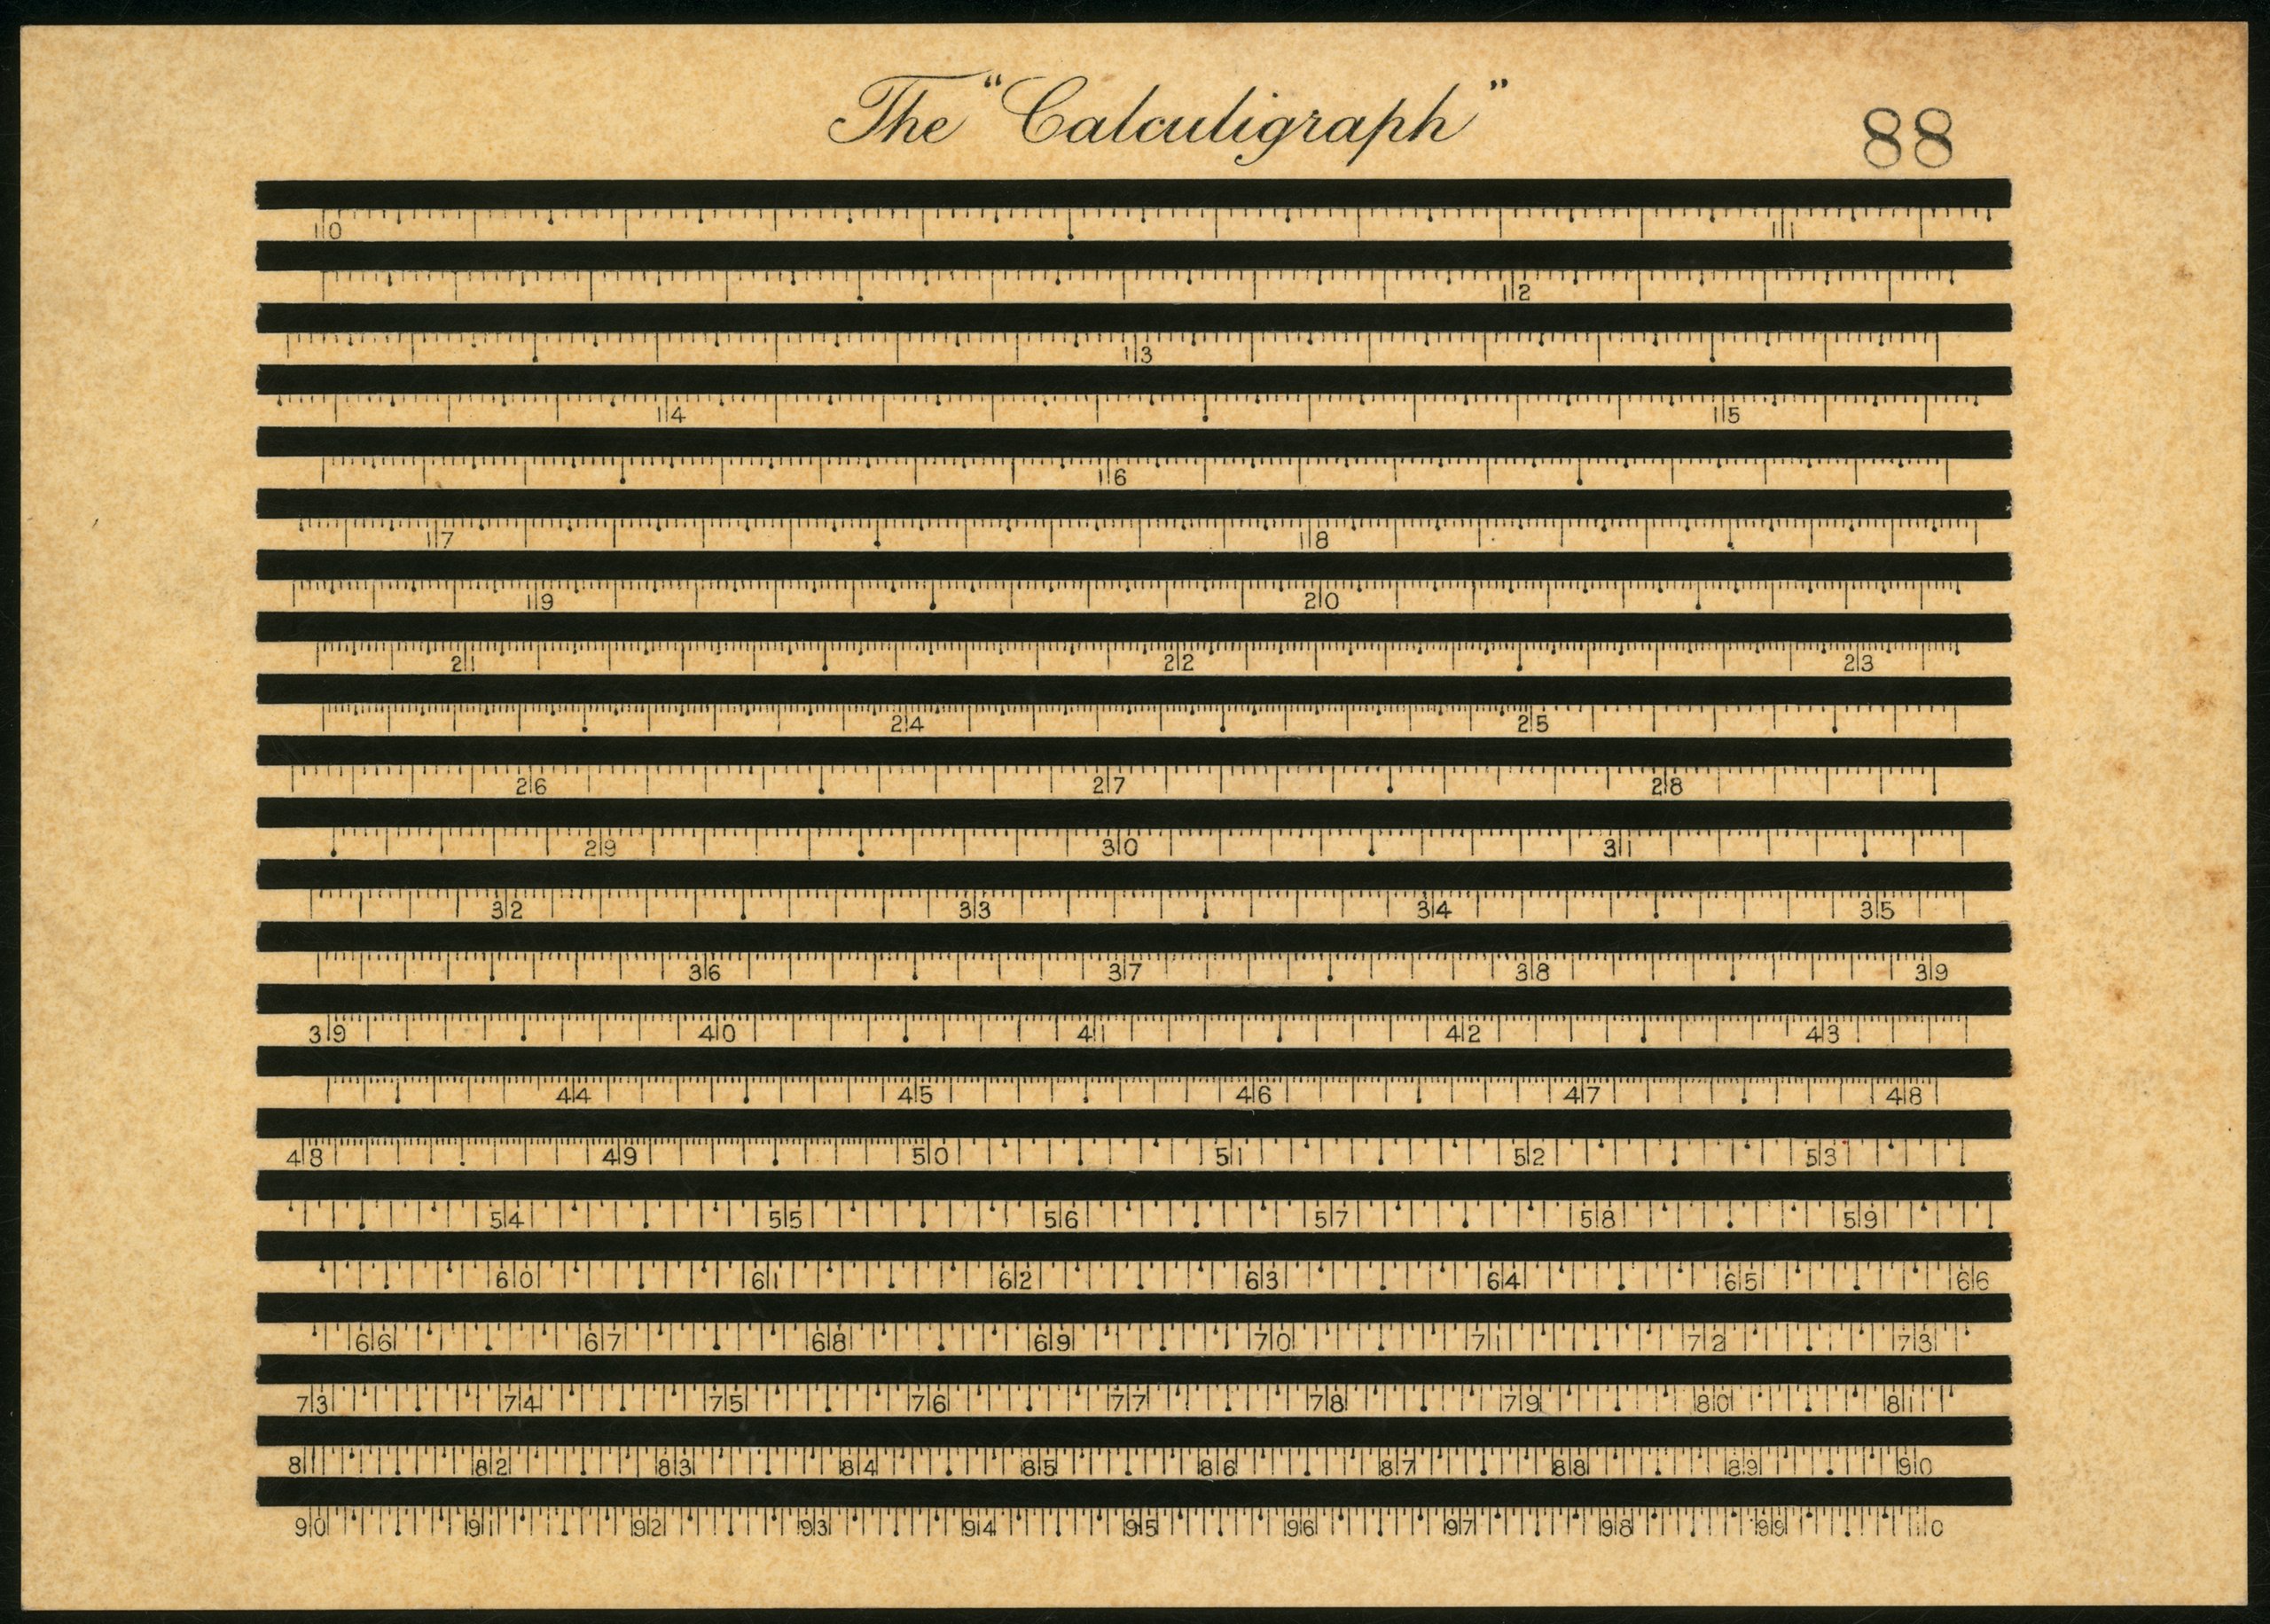 Calculigraph slide rule and charts